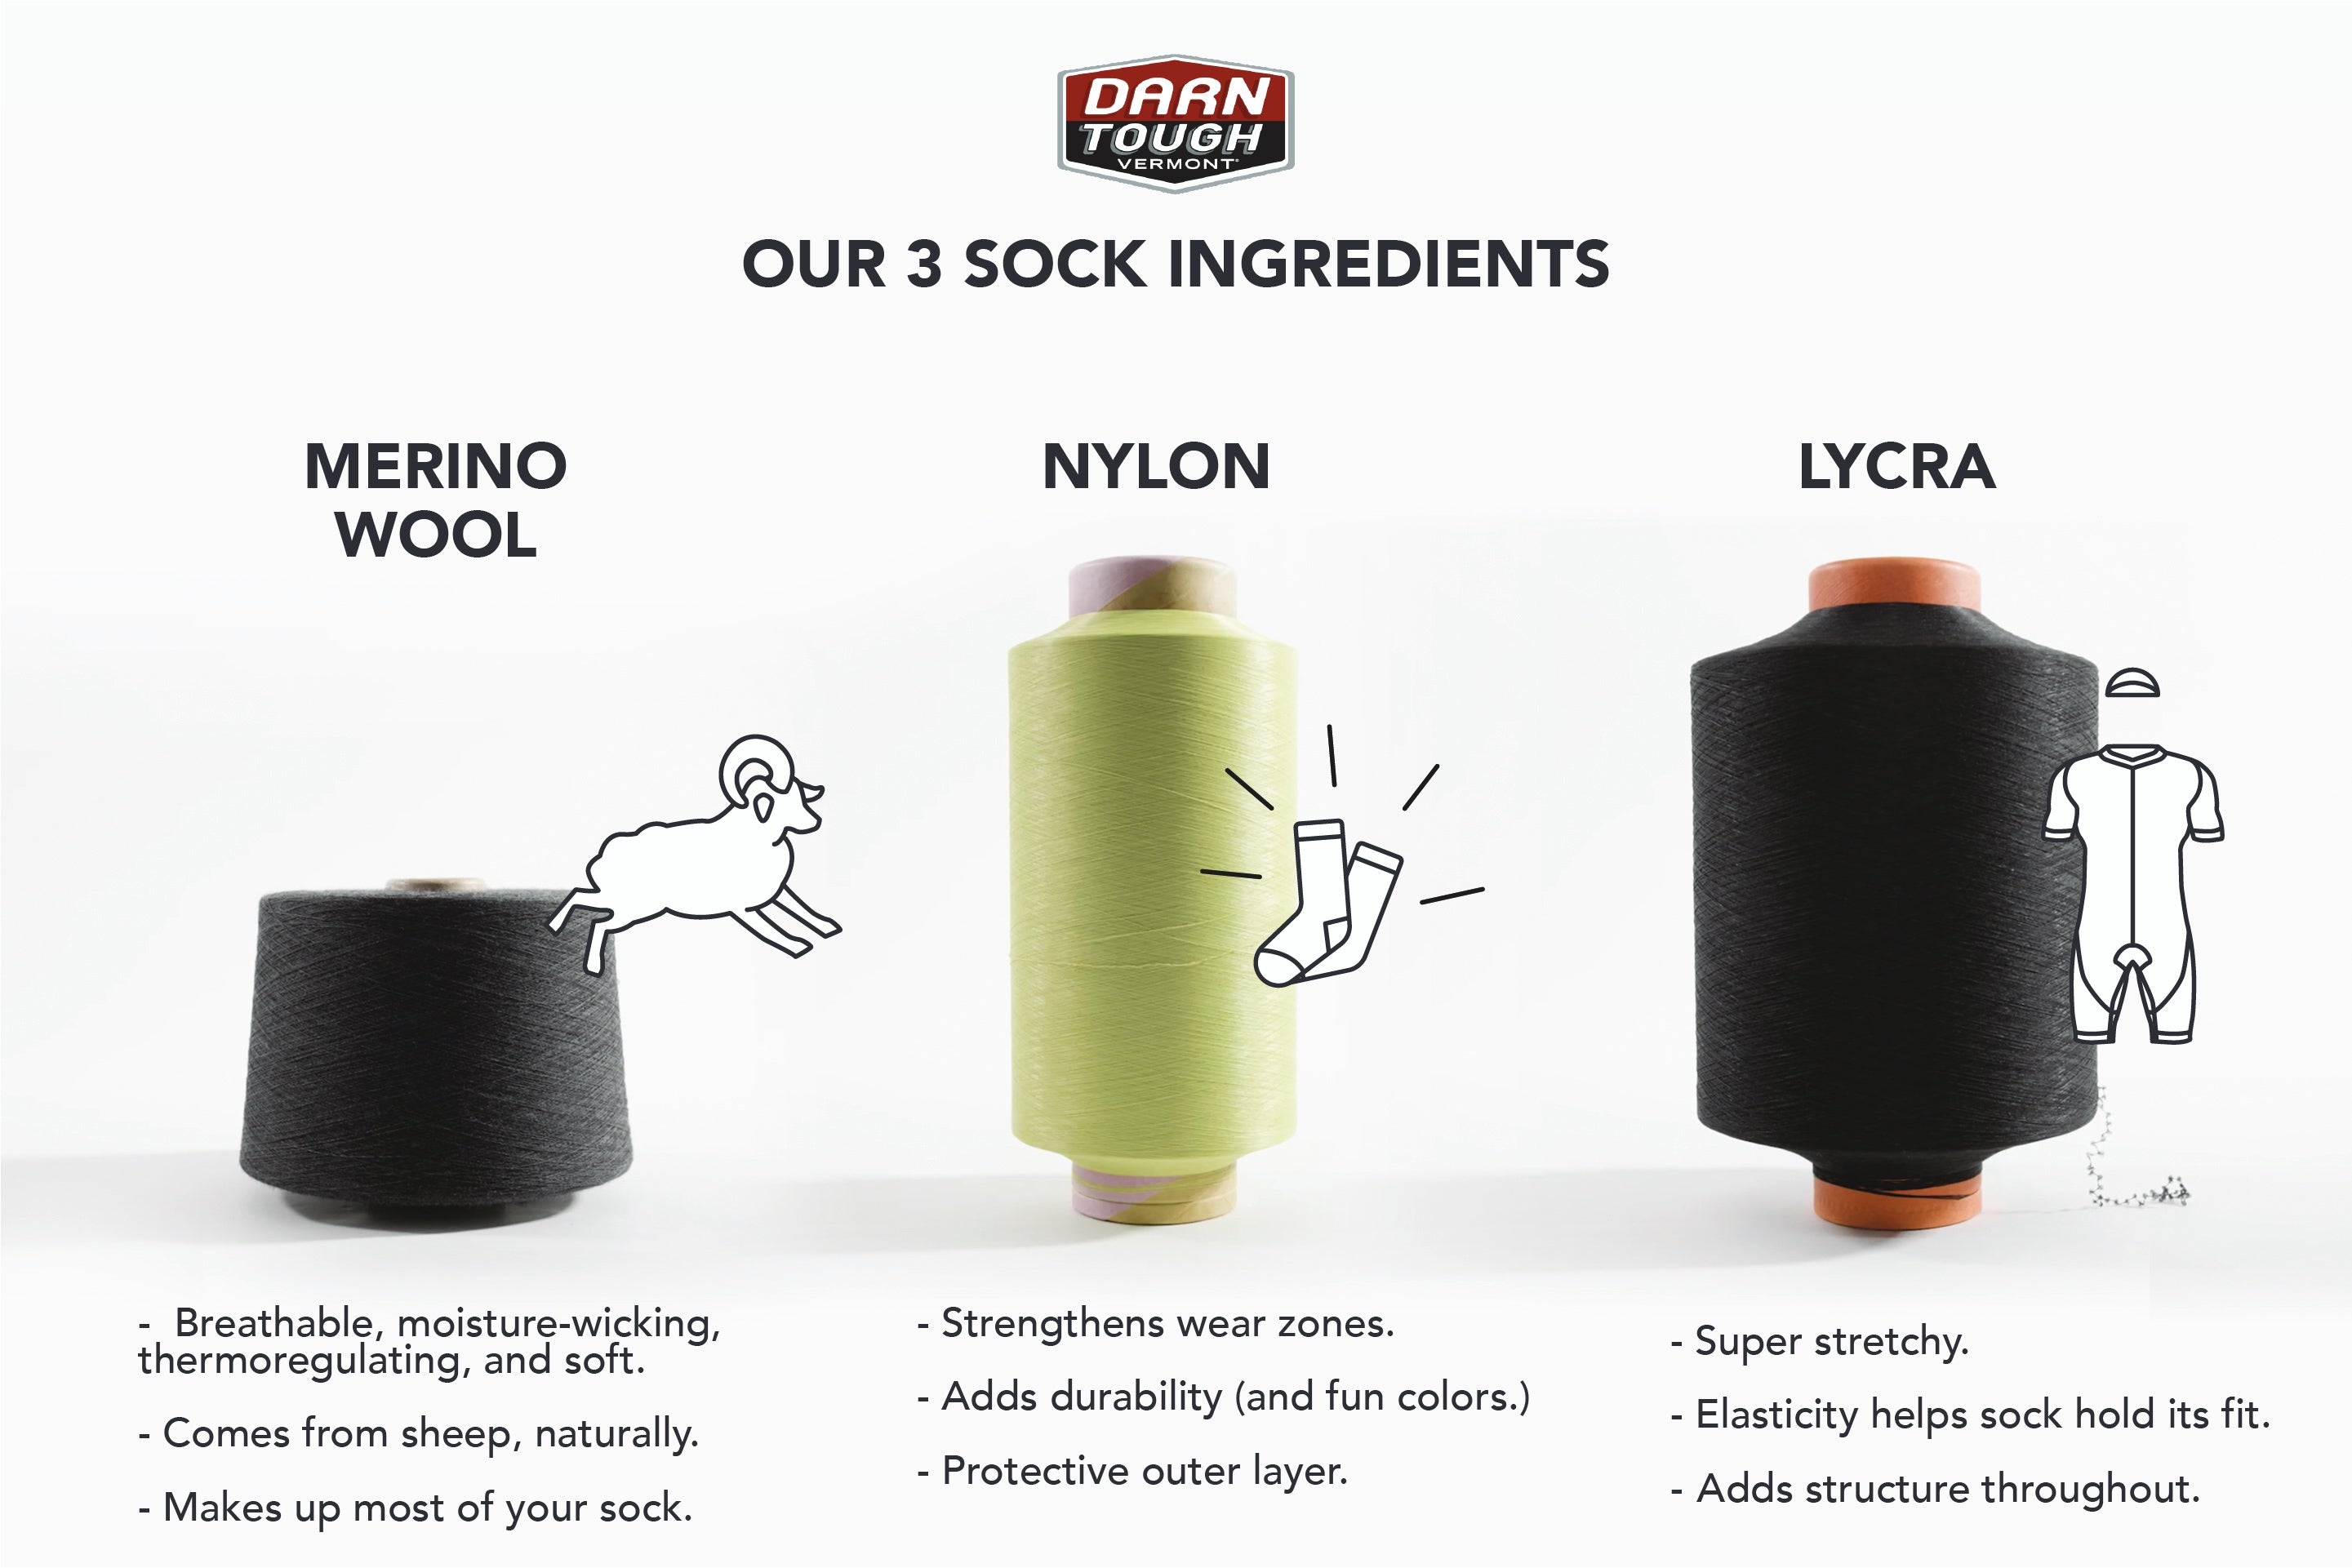 Infographic showing how Merino Wool, Nylon, and Lycra Spandex help make our socks so good